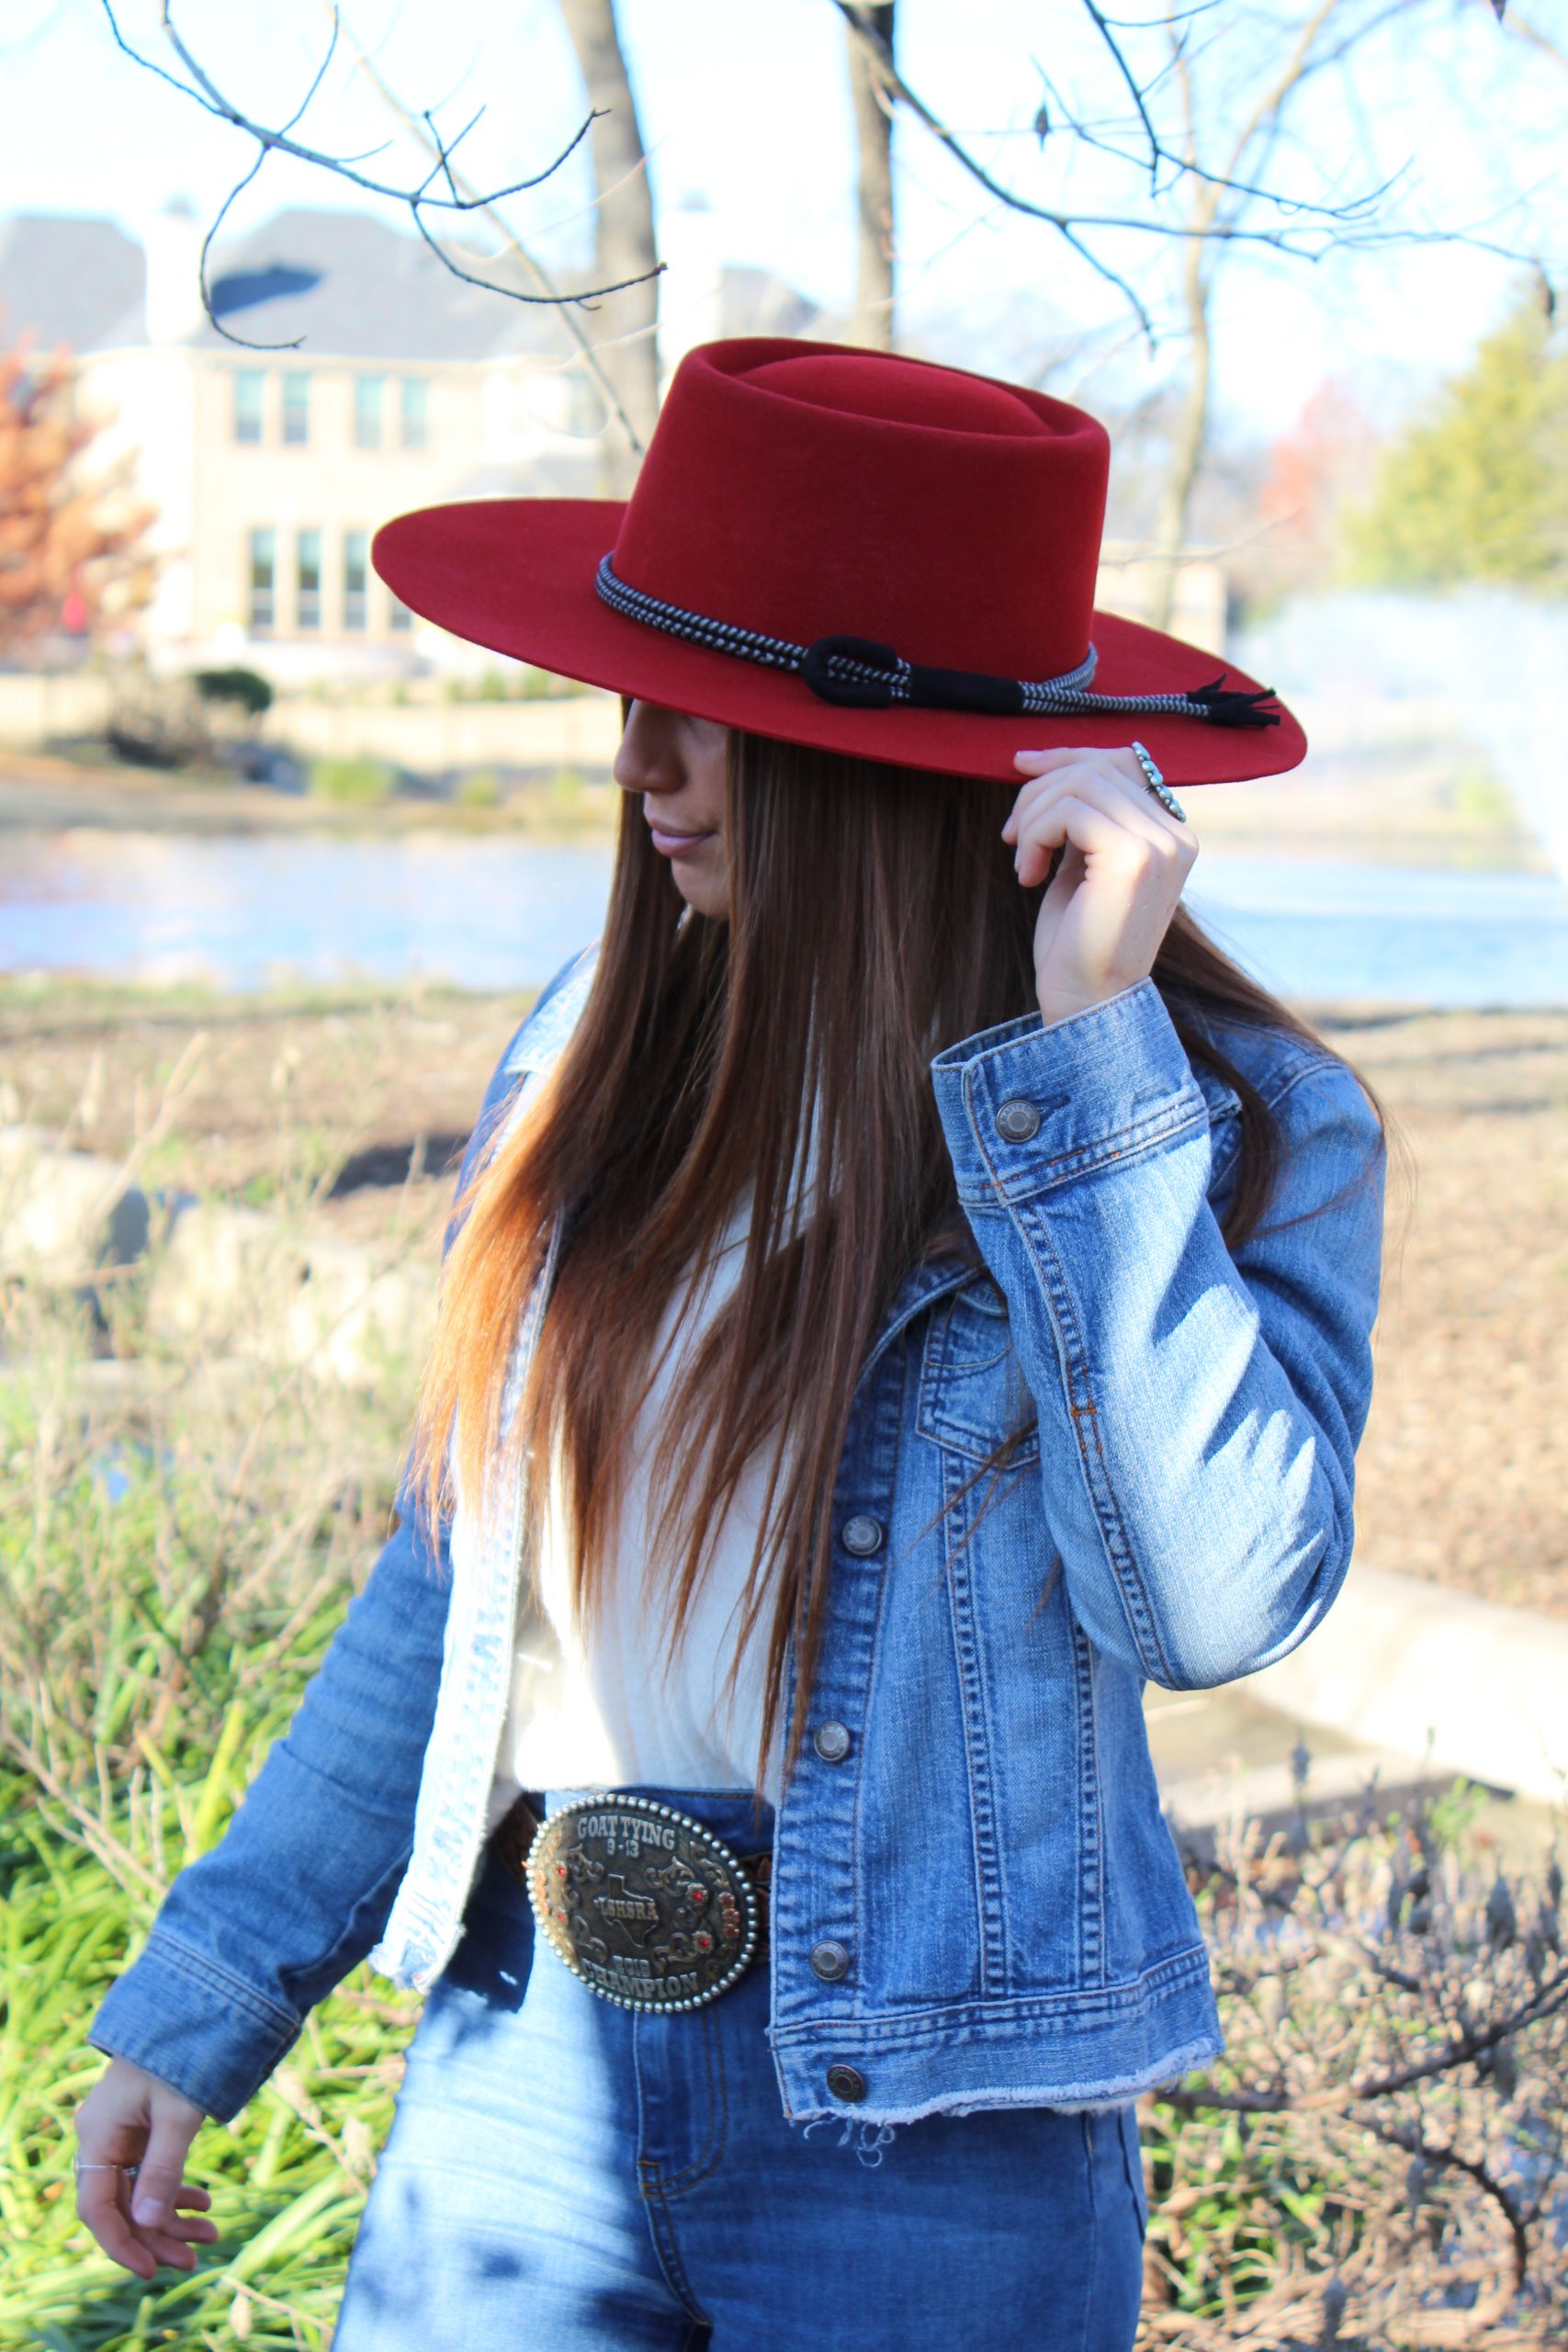 Sky Blue Gambler Hat  Gambler hat, Country style outfits, Cowgirl